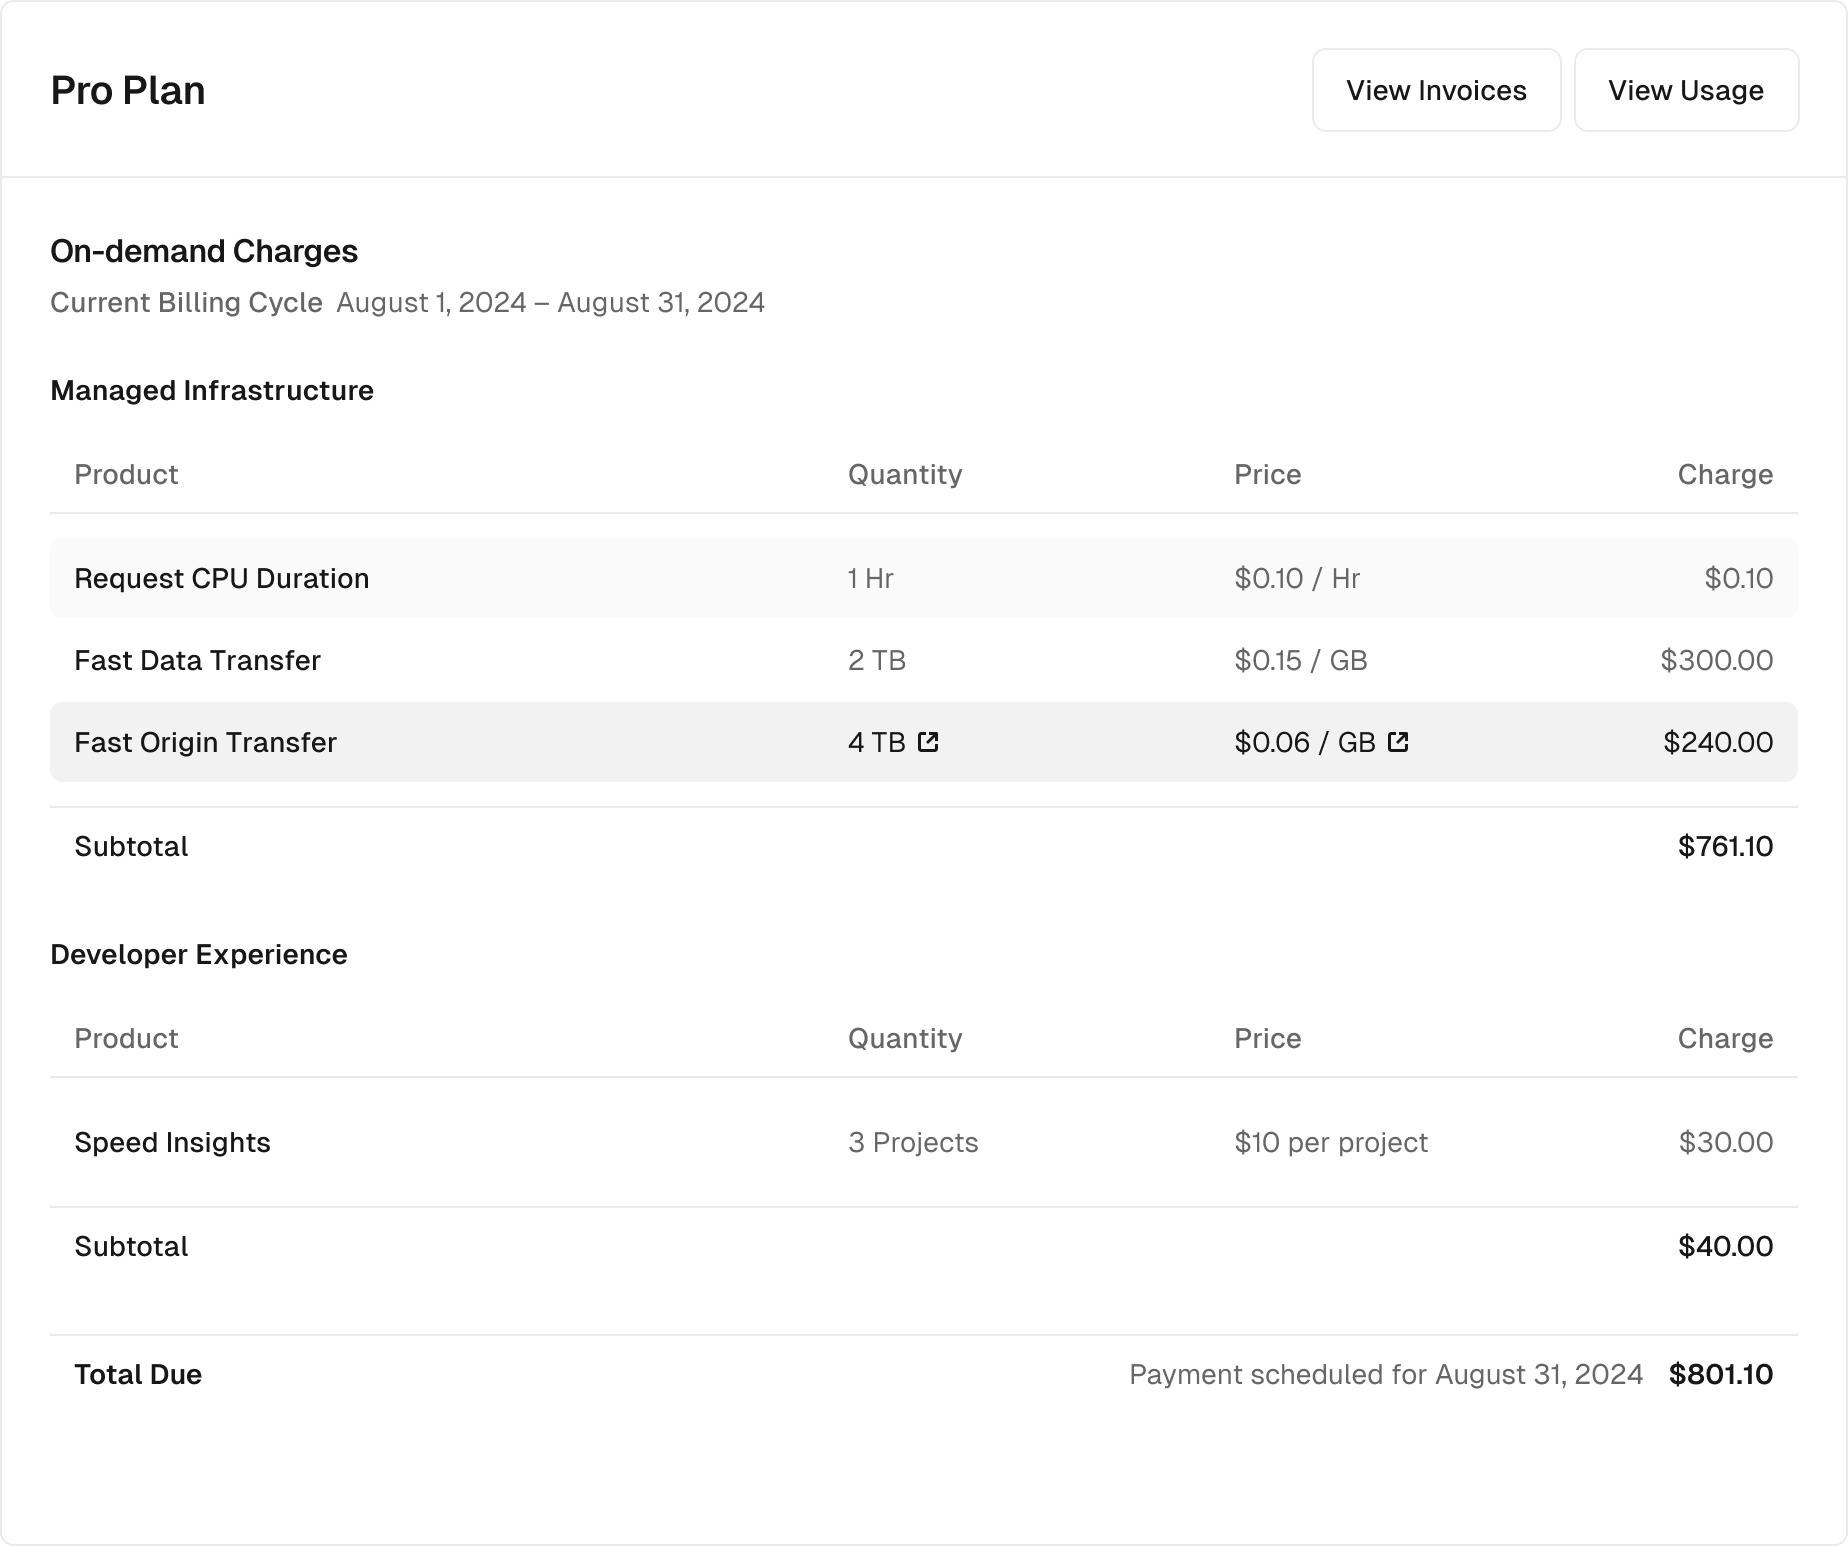 Pro plan invoice with on-demand charges